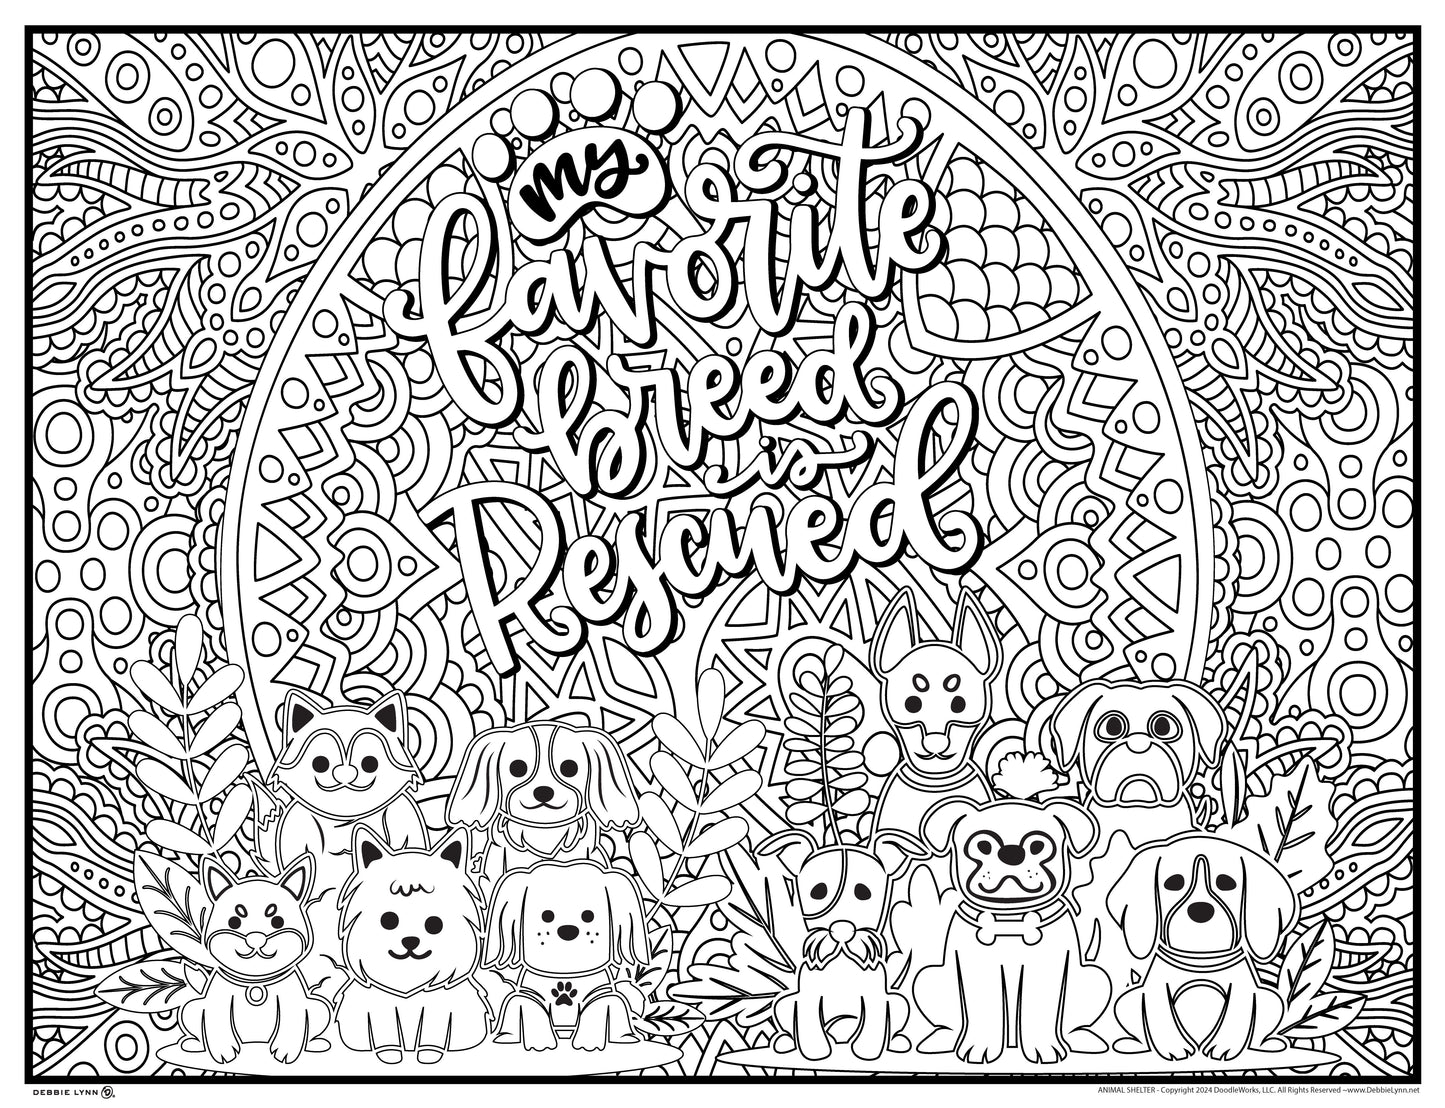 Animal Shelter Giant Coloring Poster 46"x60"